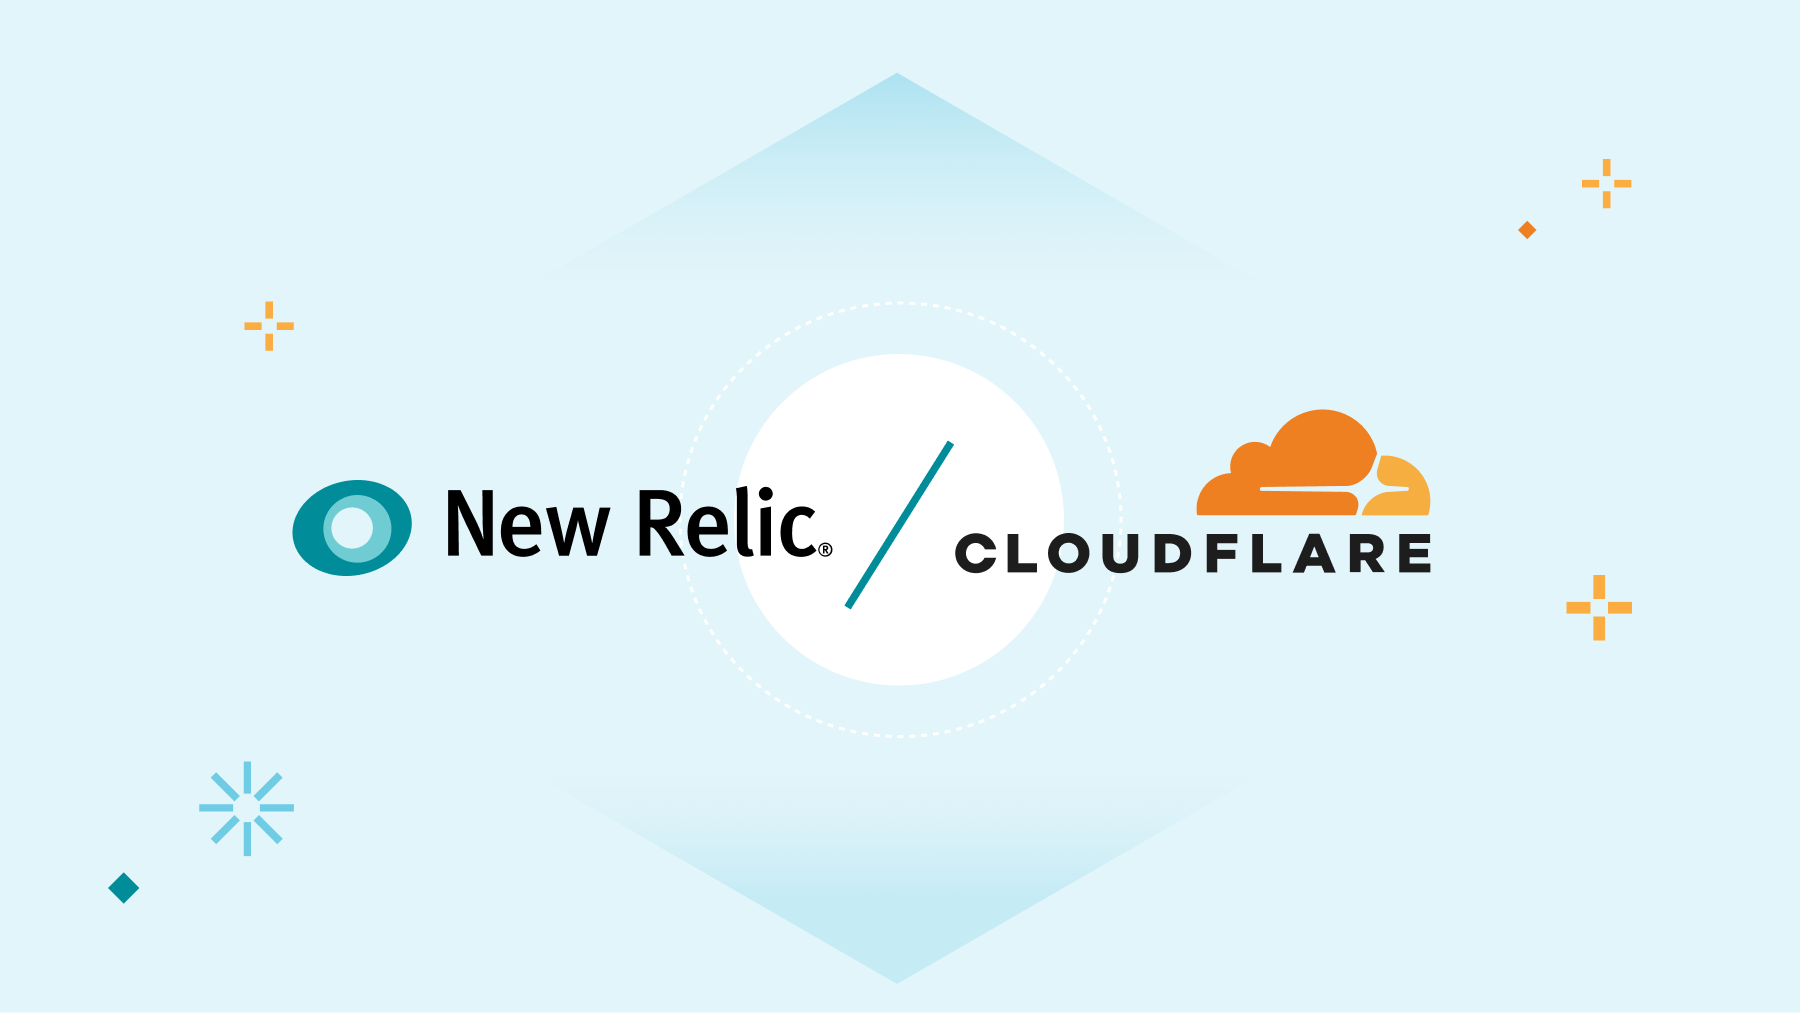 Get full observability into your Cloudflare logs with New Relic